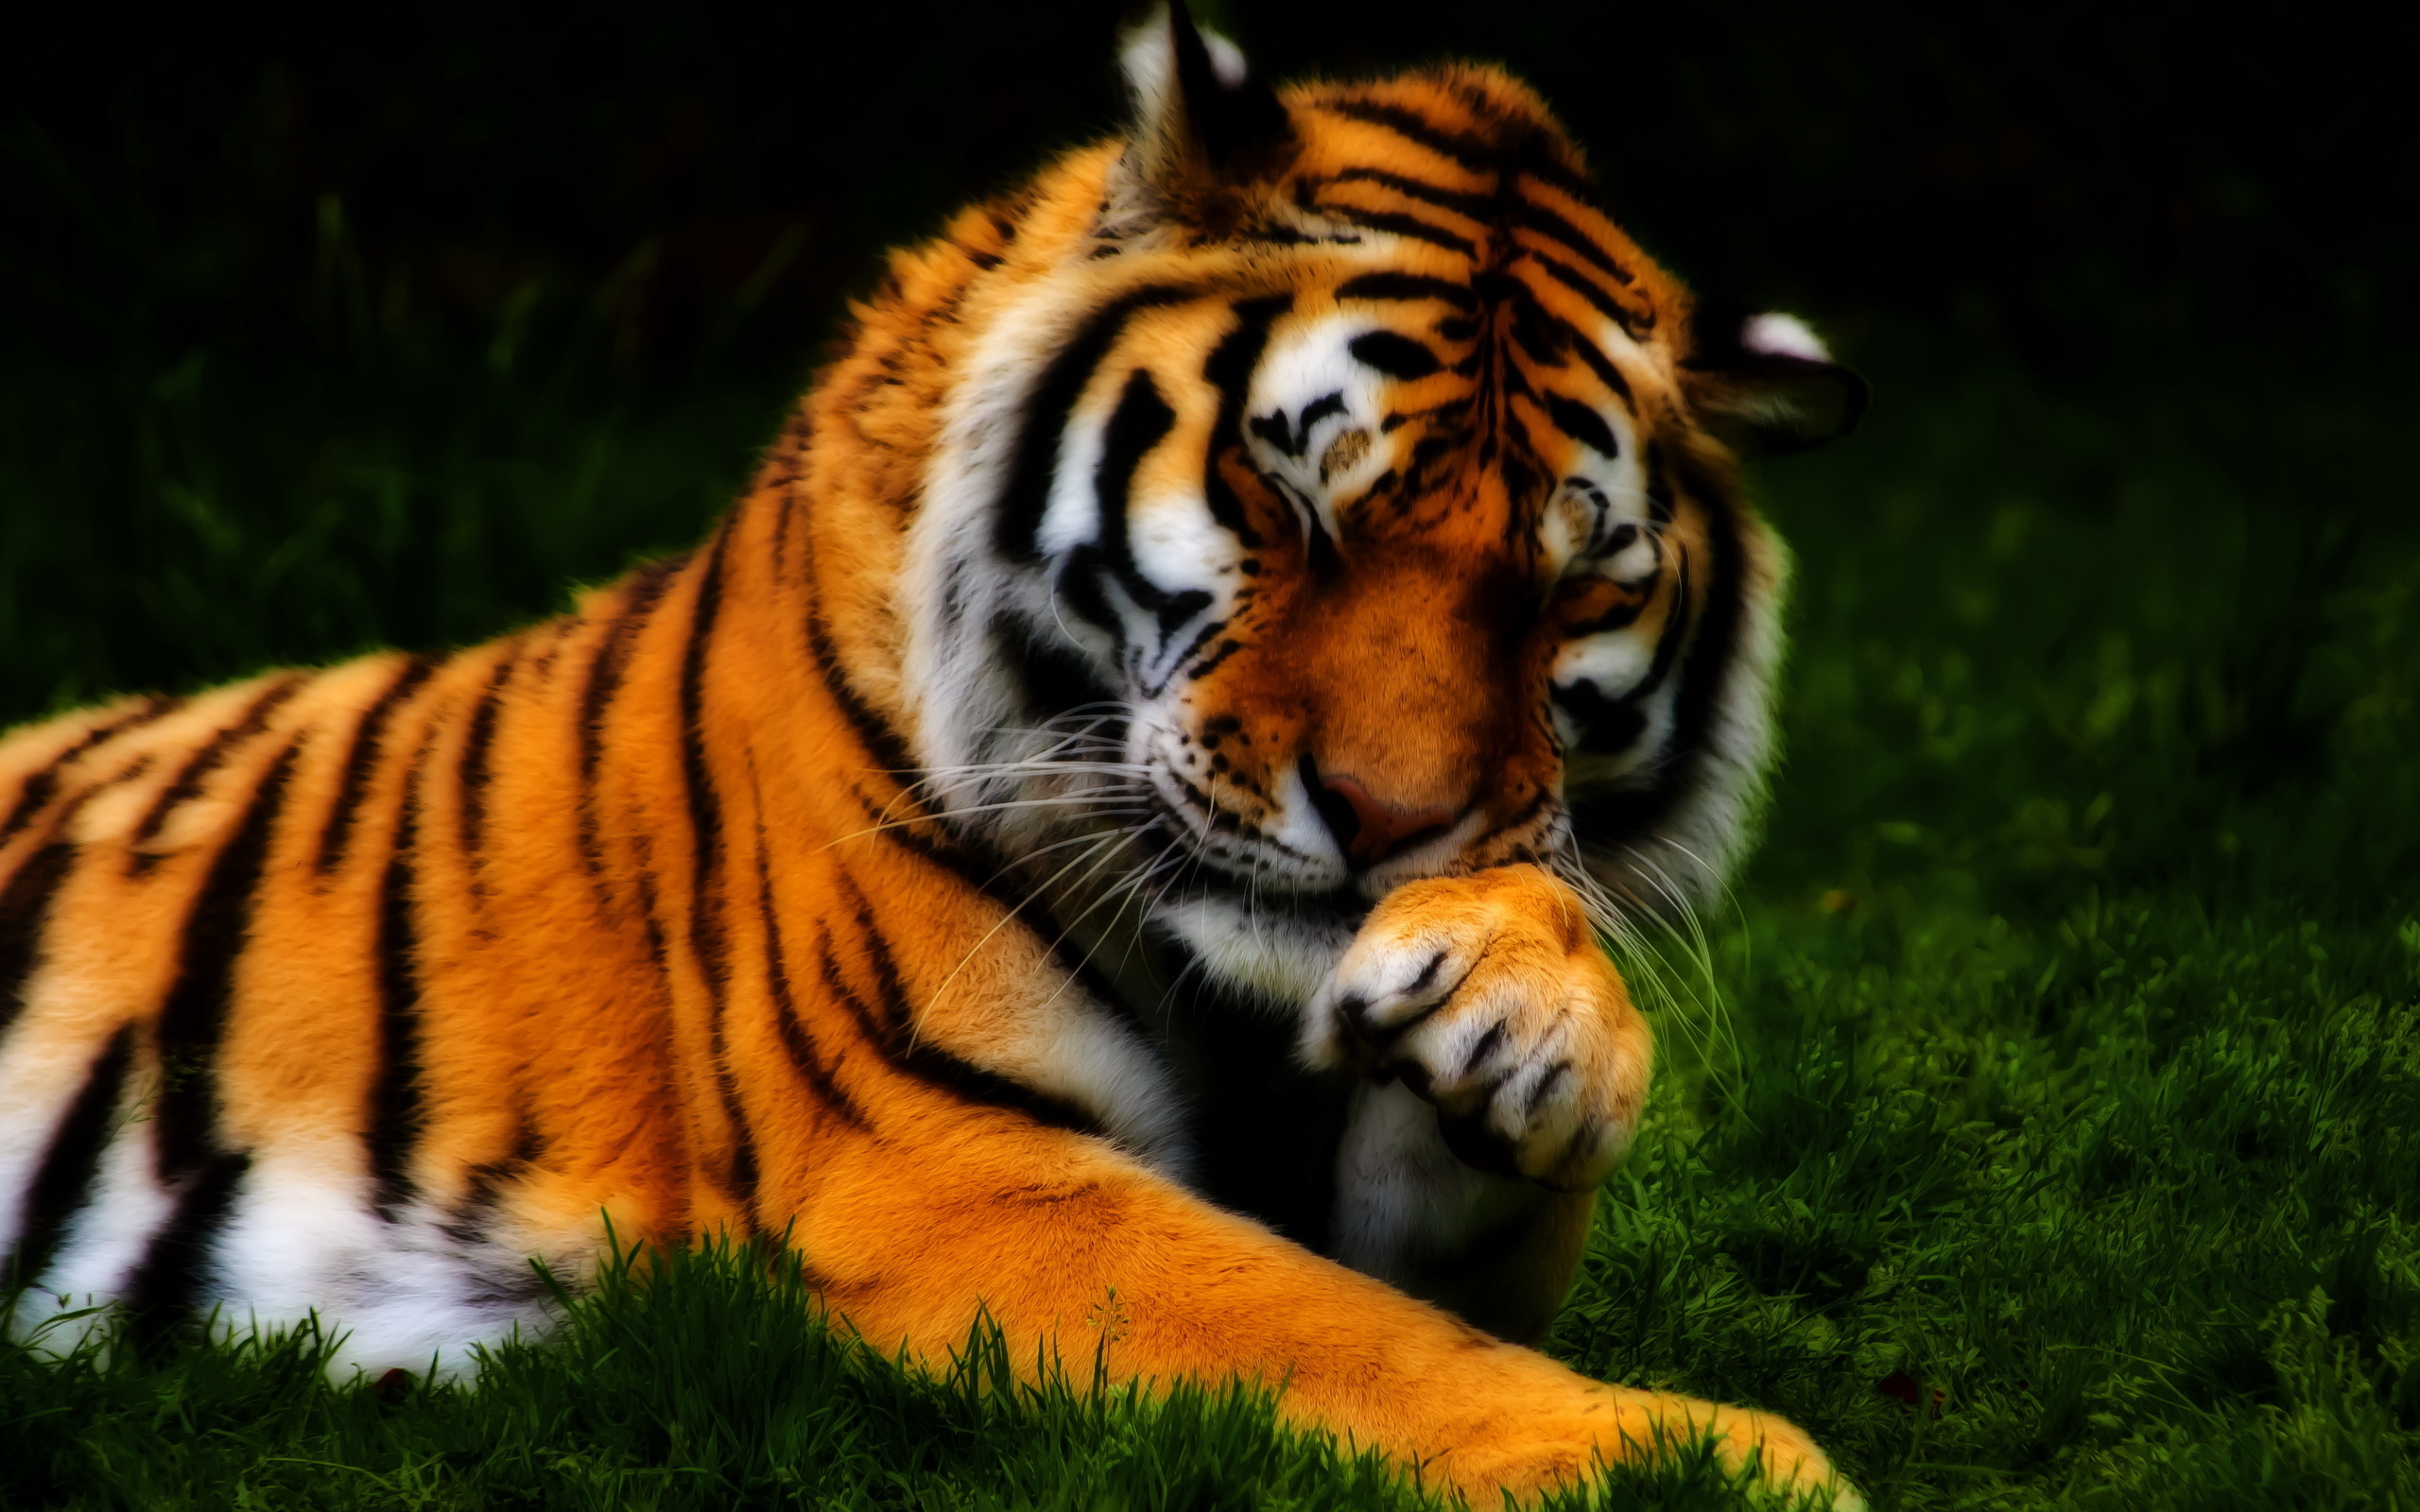 This Is A Very Cool Wallpaper With Tiger That I Have Found On The